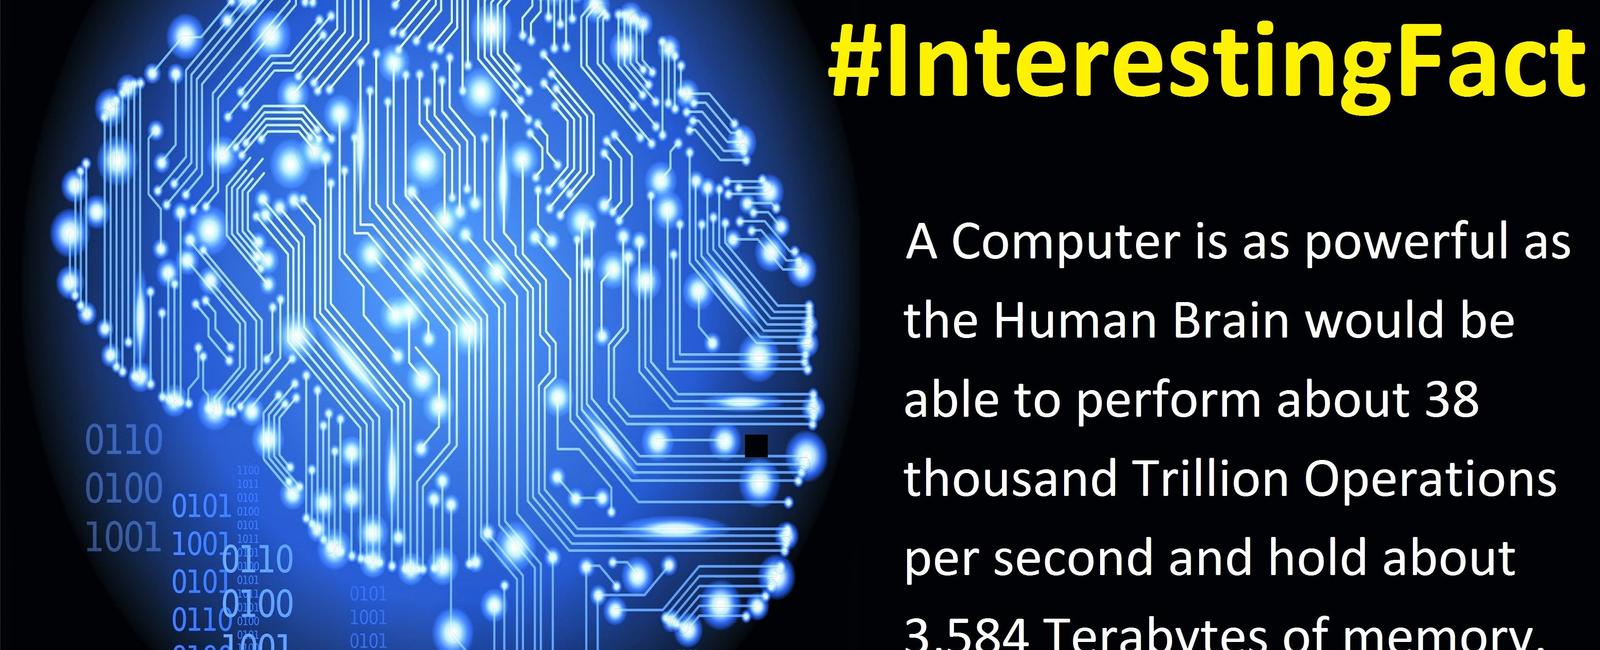 A computer as powerful as the human brain would be able to perform about 38 thousand trillion operations per second and hold about 3 584 terabytes of memory